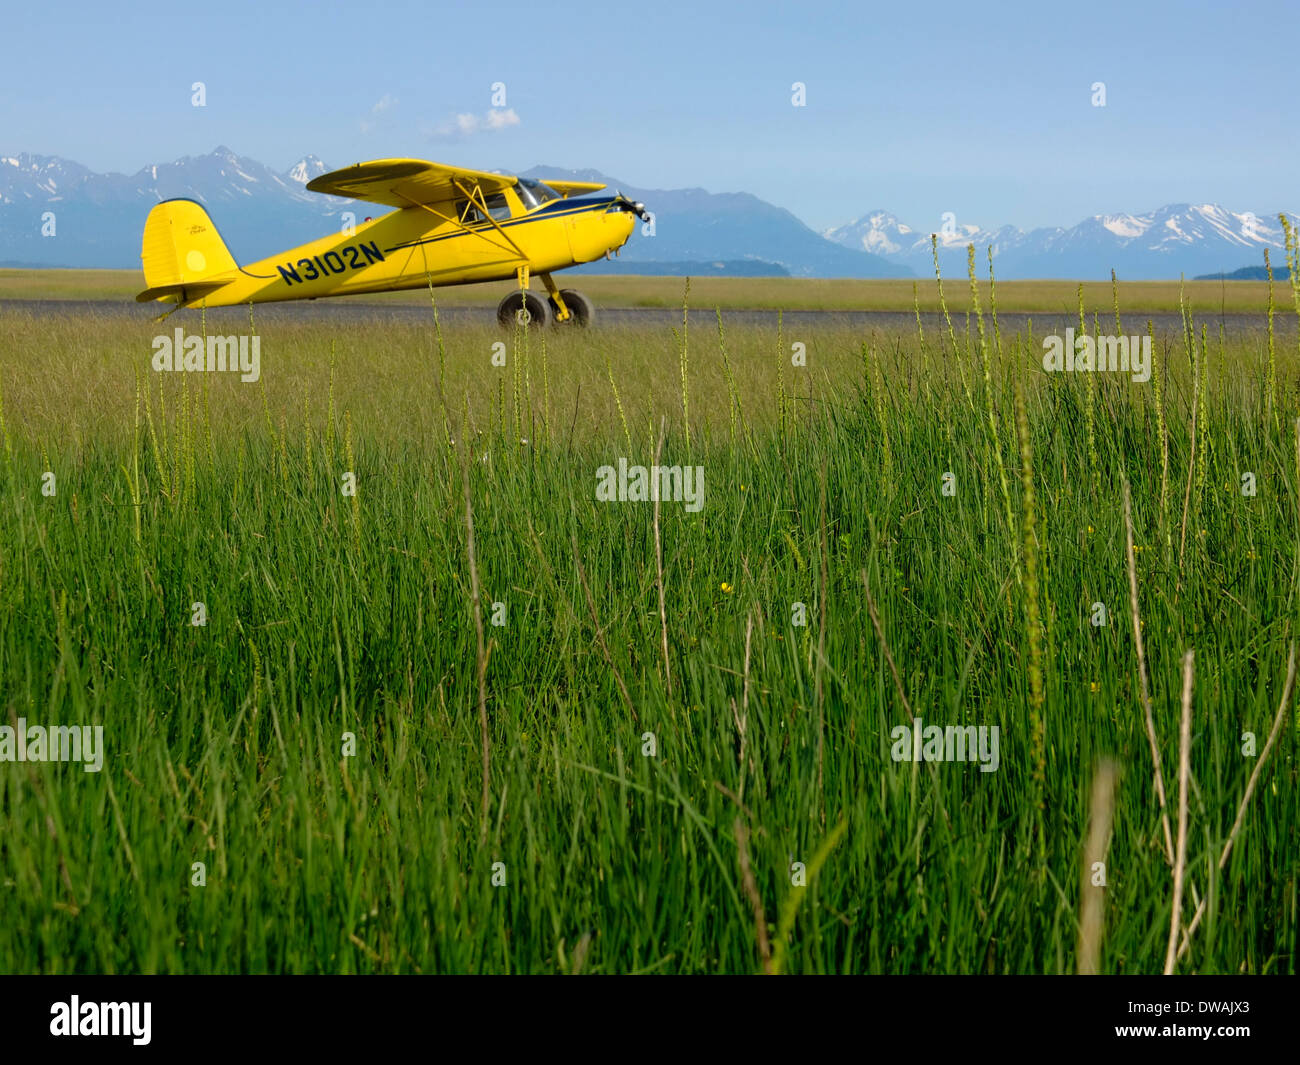 Yellow Cessna 120 single engine bush plane parked on a grass and dirt strip in the backcountry Stock Photo